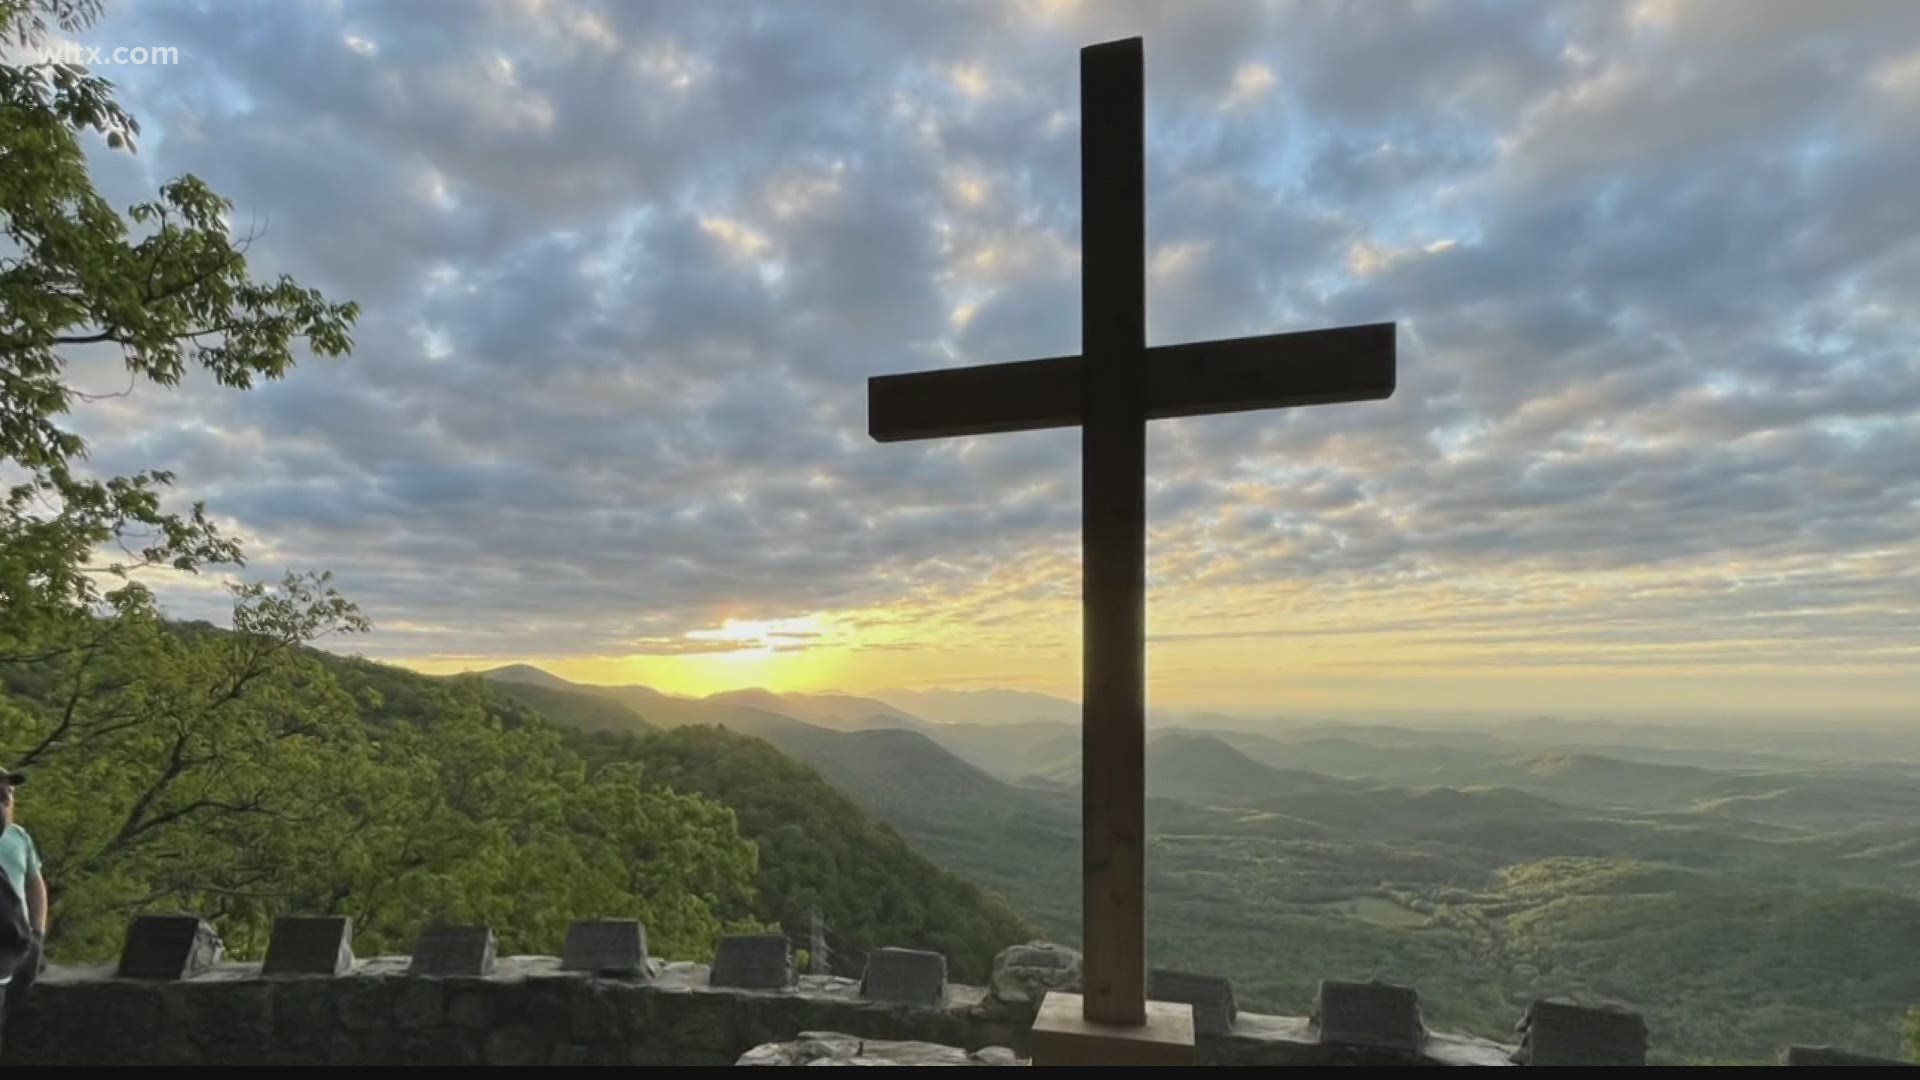 On the top of a mountain in the Upstate, people all over the country have traveled to find Pretty Place Chapel, seeking a moment of rest and reflection.